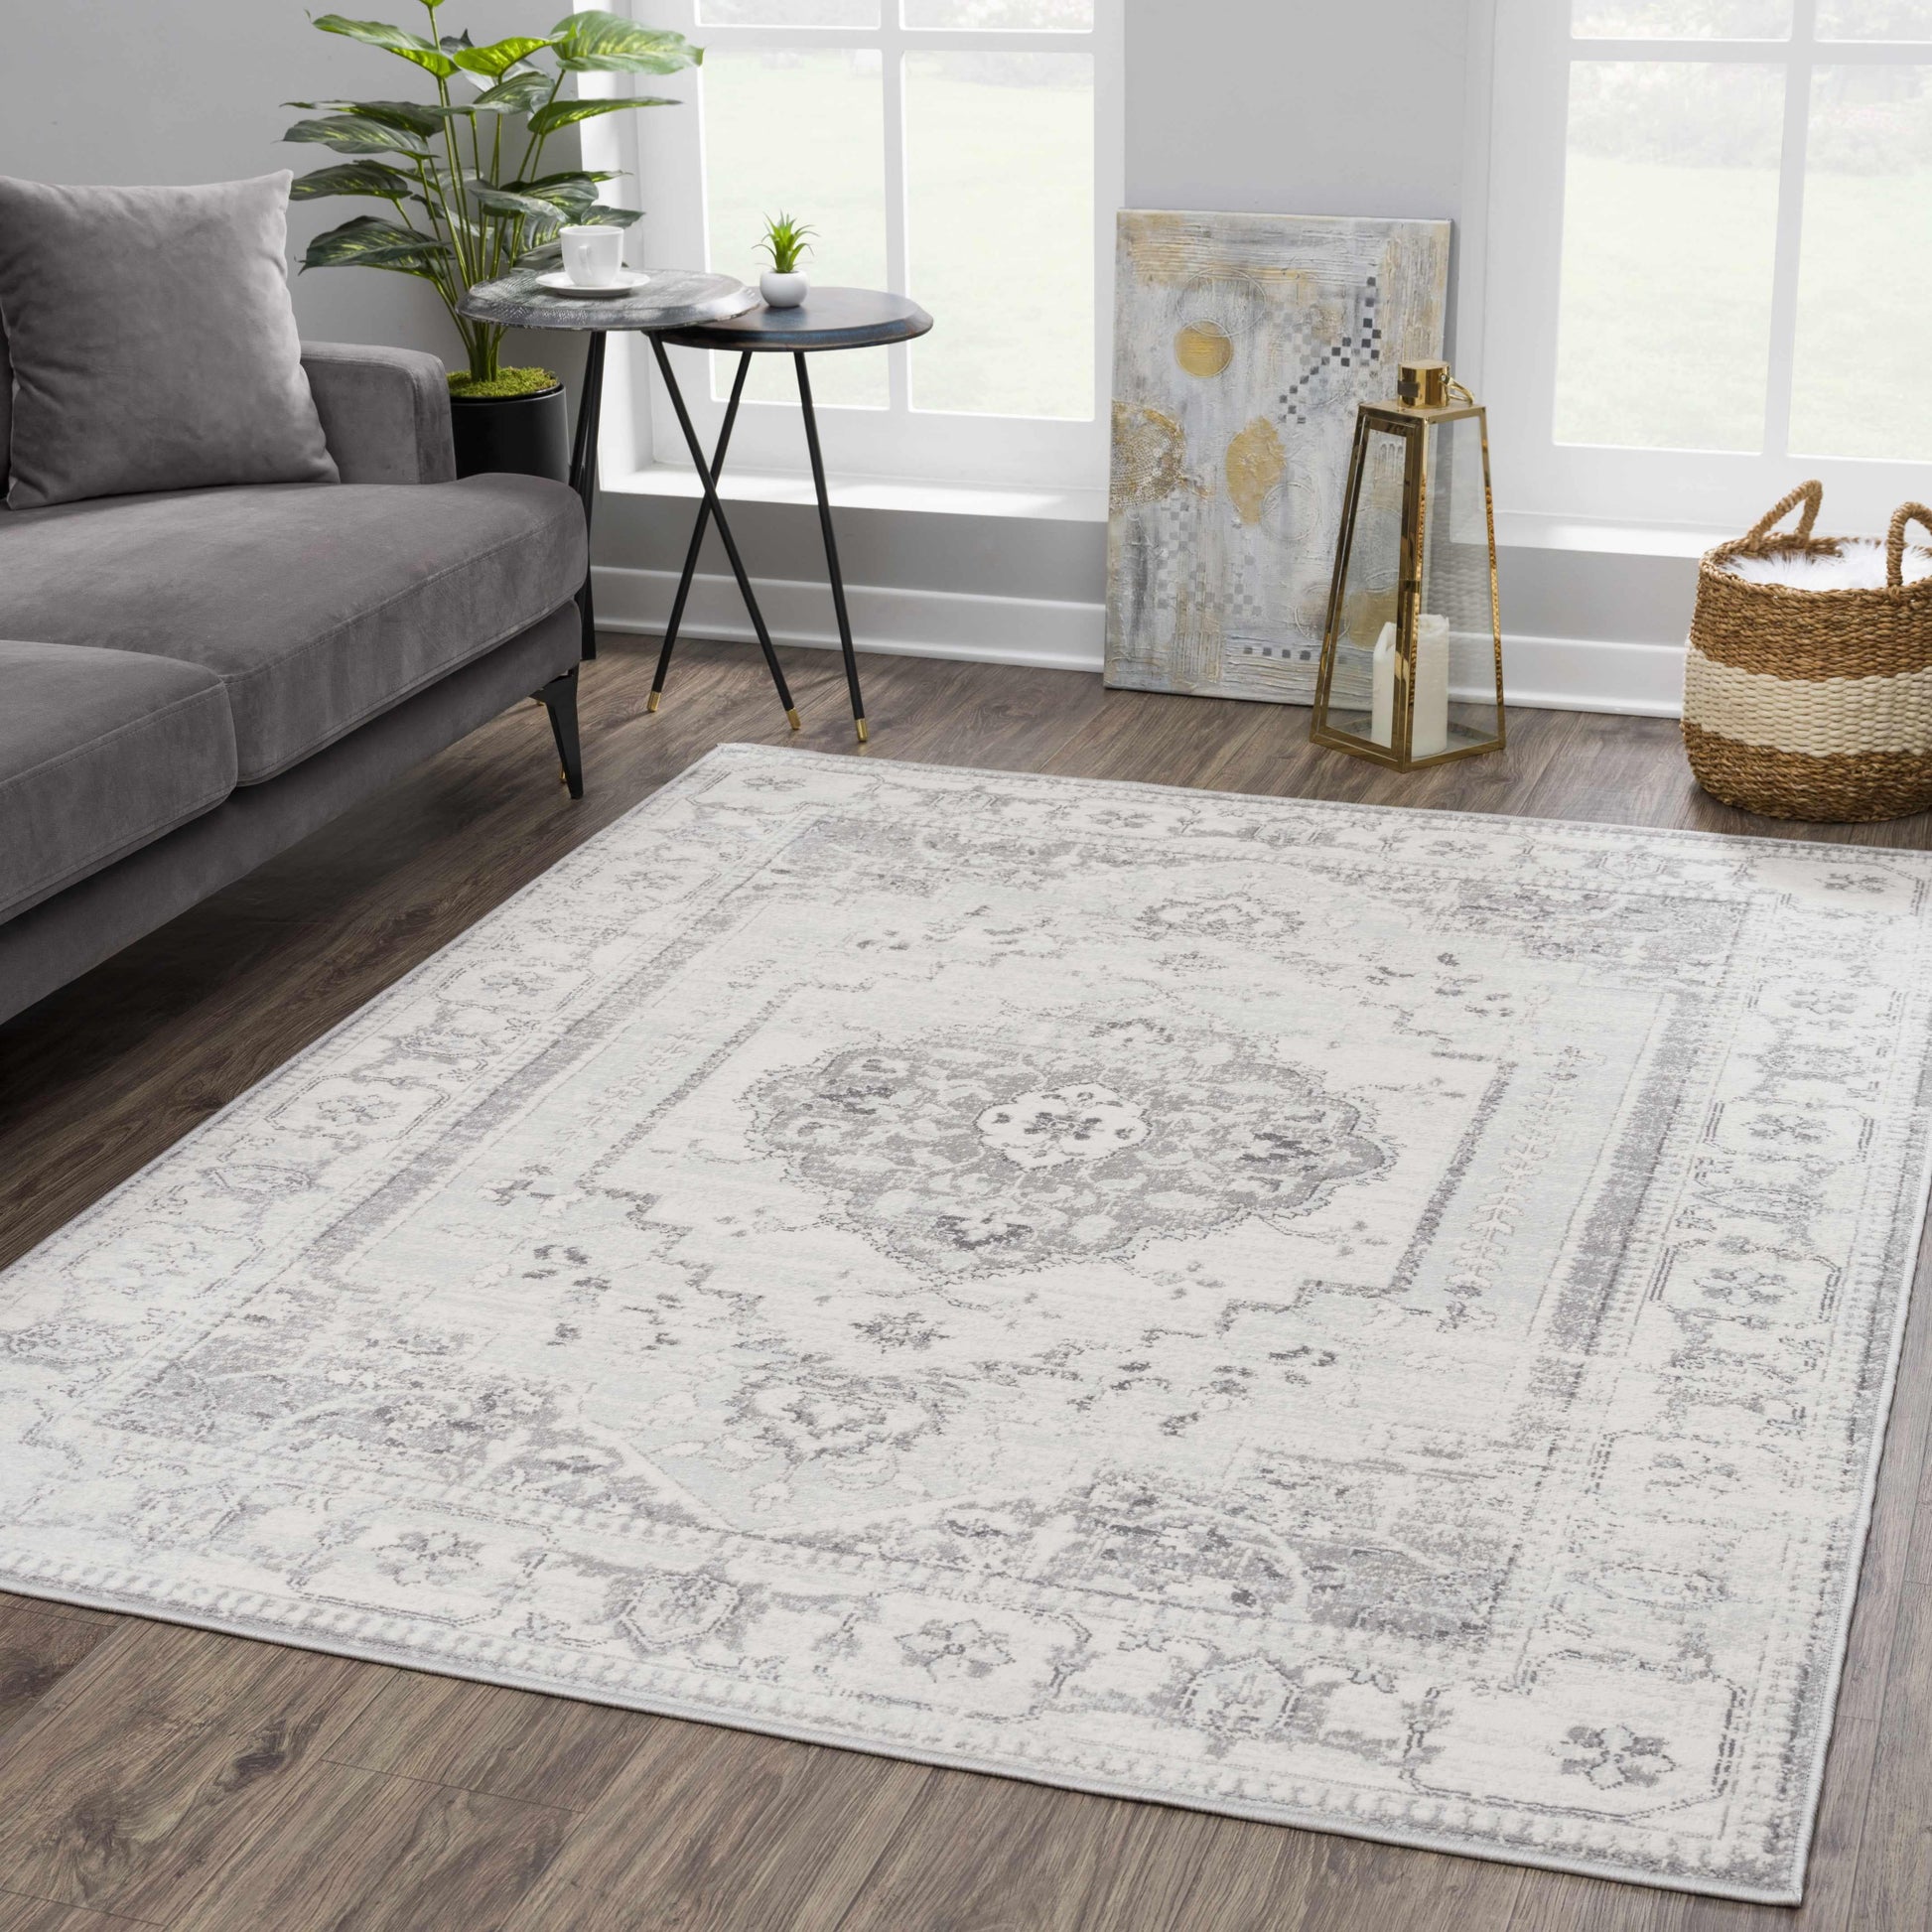 Boutique Rugs Rugs Tigried Ivory & Gray 2315 Area Rug